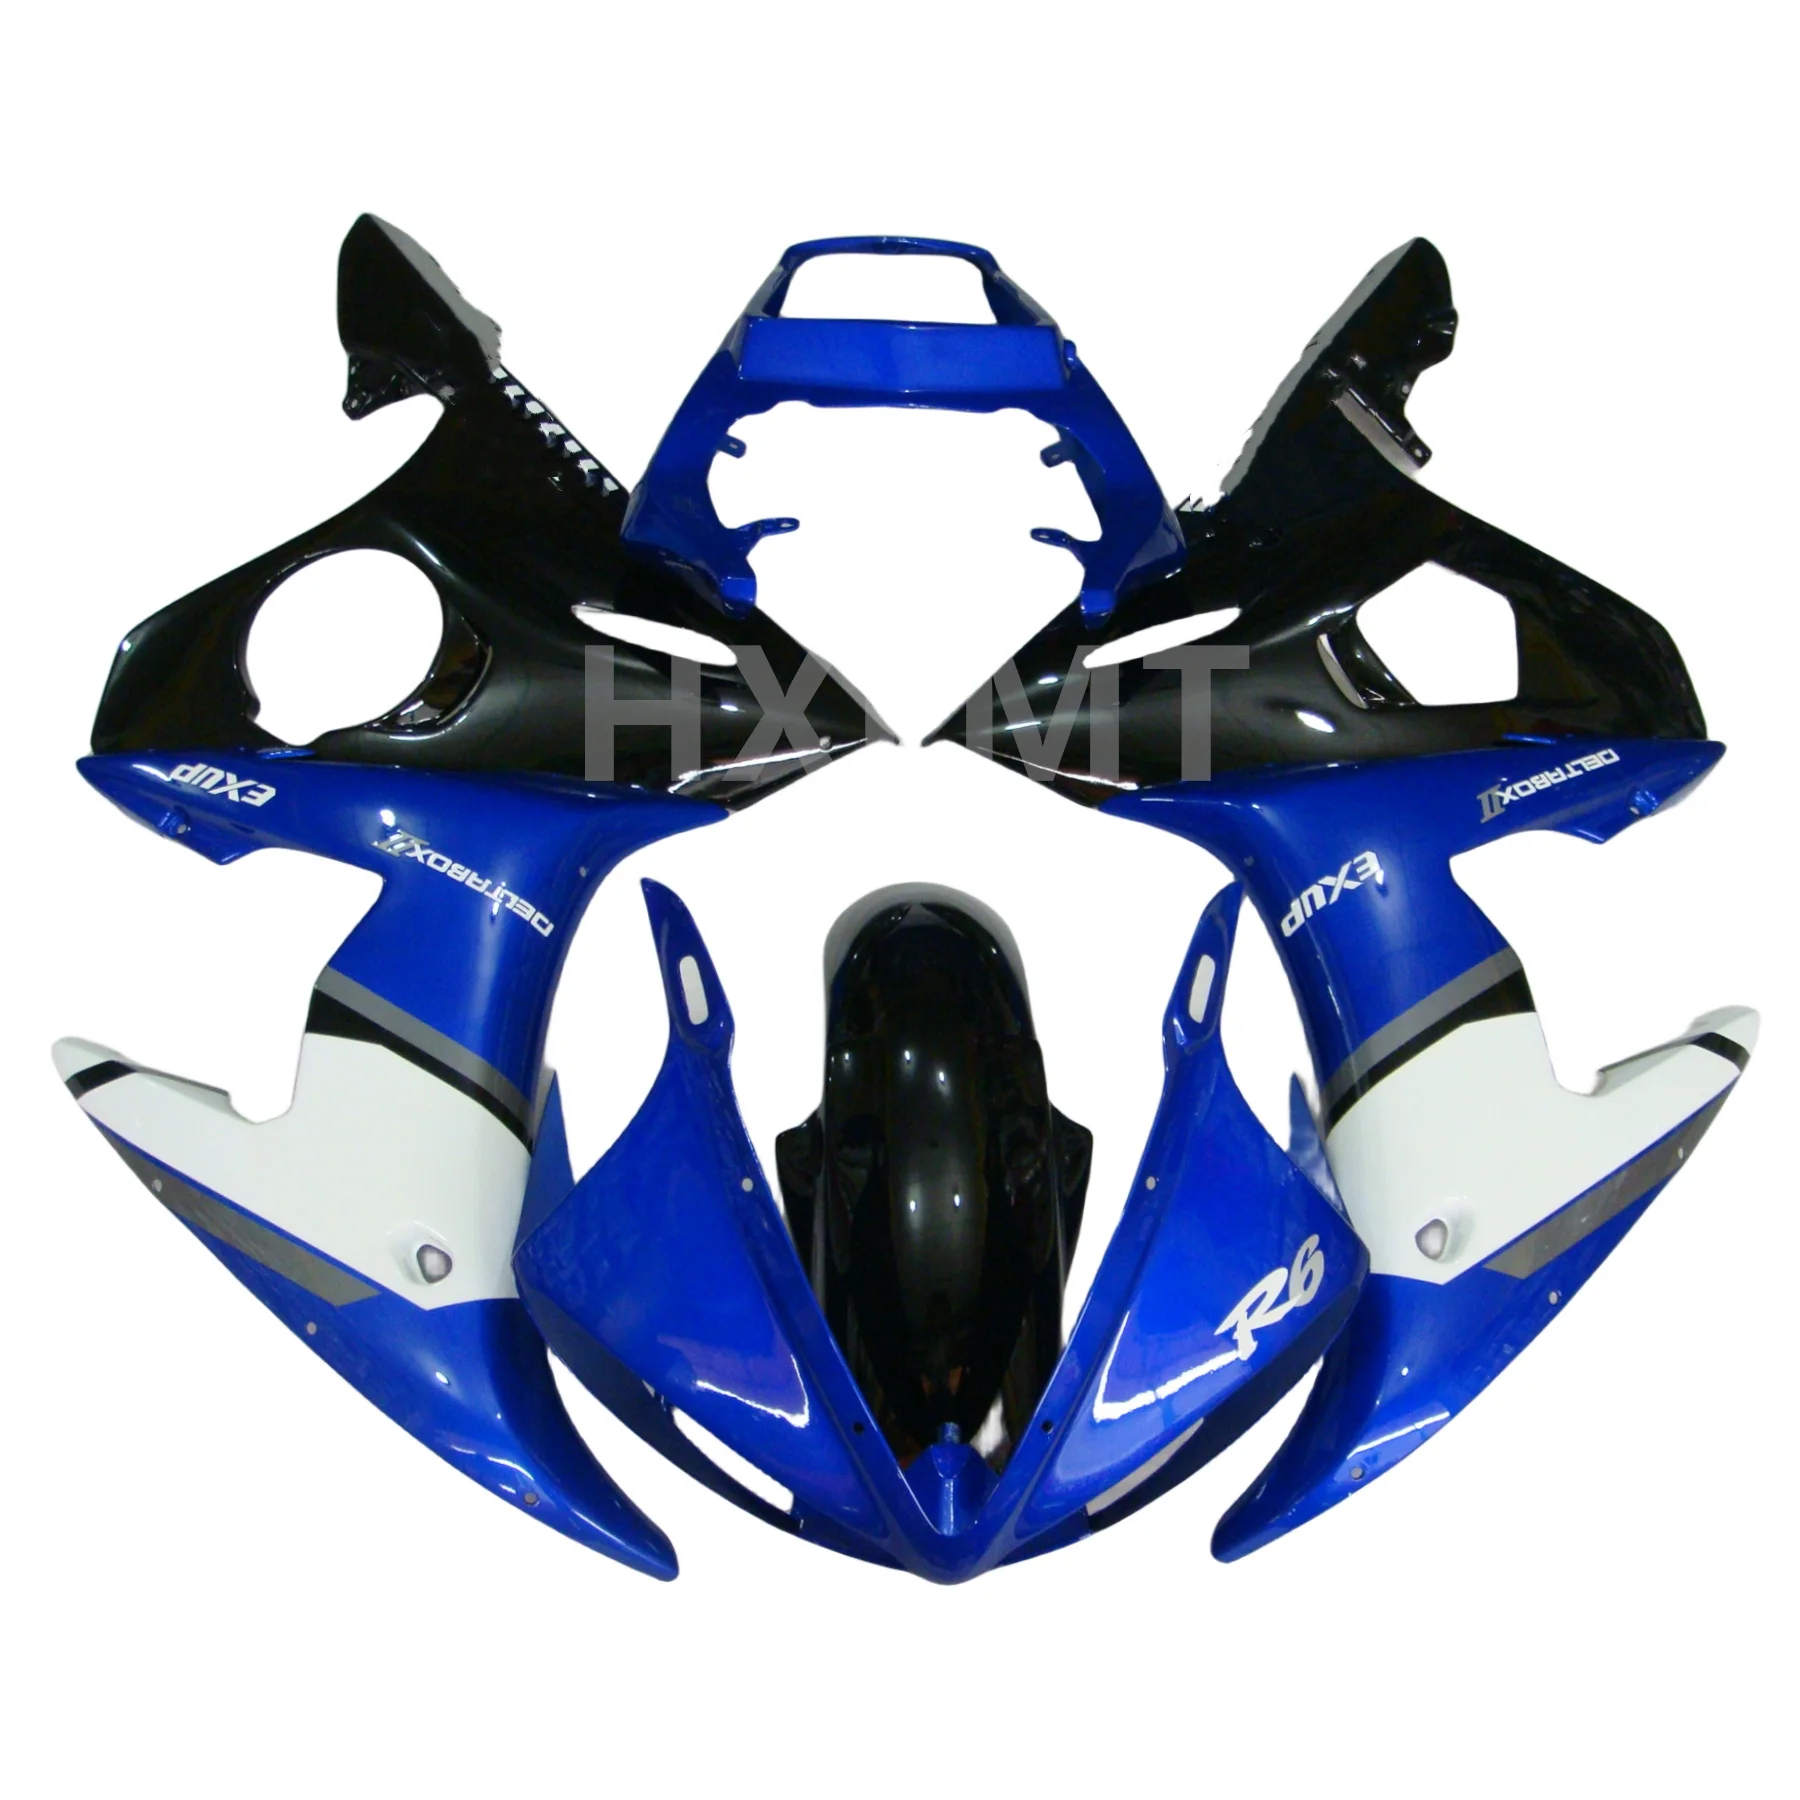 

Motorcycle Accessories Fairings Kits R6 03 04 05 Injection Full Bodywork Kit Cowl For Yamaha YZFR6 YZF-R6 YZF R6 2003 2004 2005